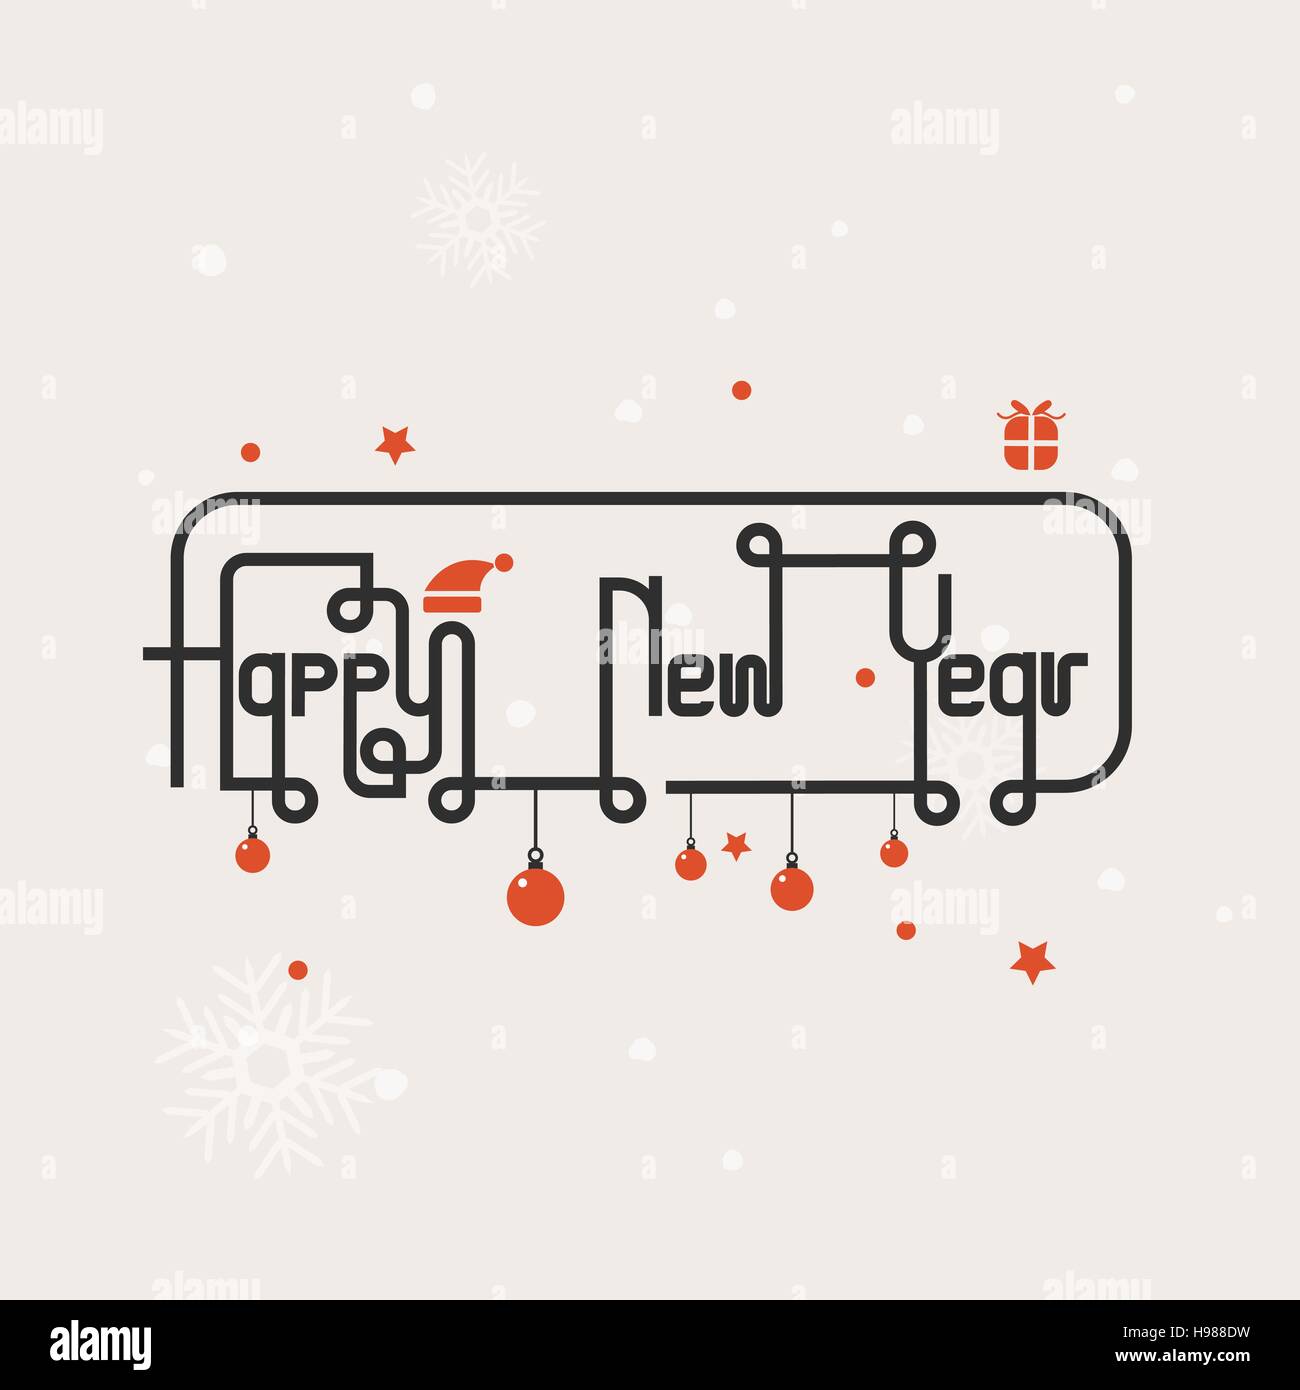 Happy new year lettering abstract background.Handdrawn Happy new year typography.Celebration quote"Happy new year" for postcard,Happy new year icon/lo Stock Vector